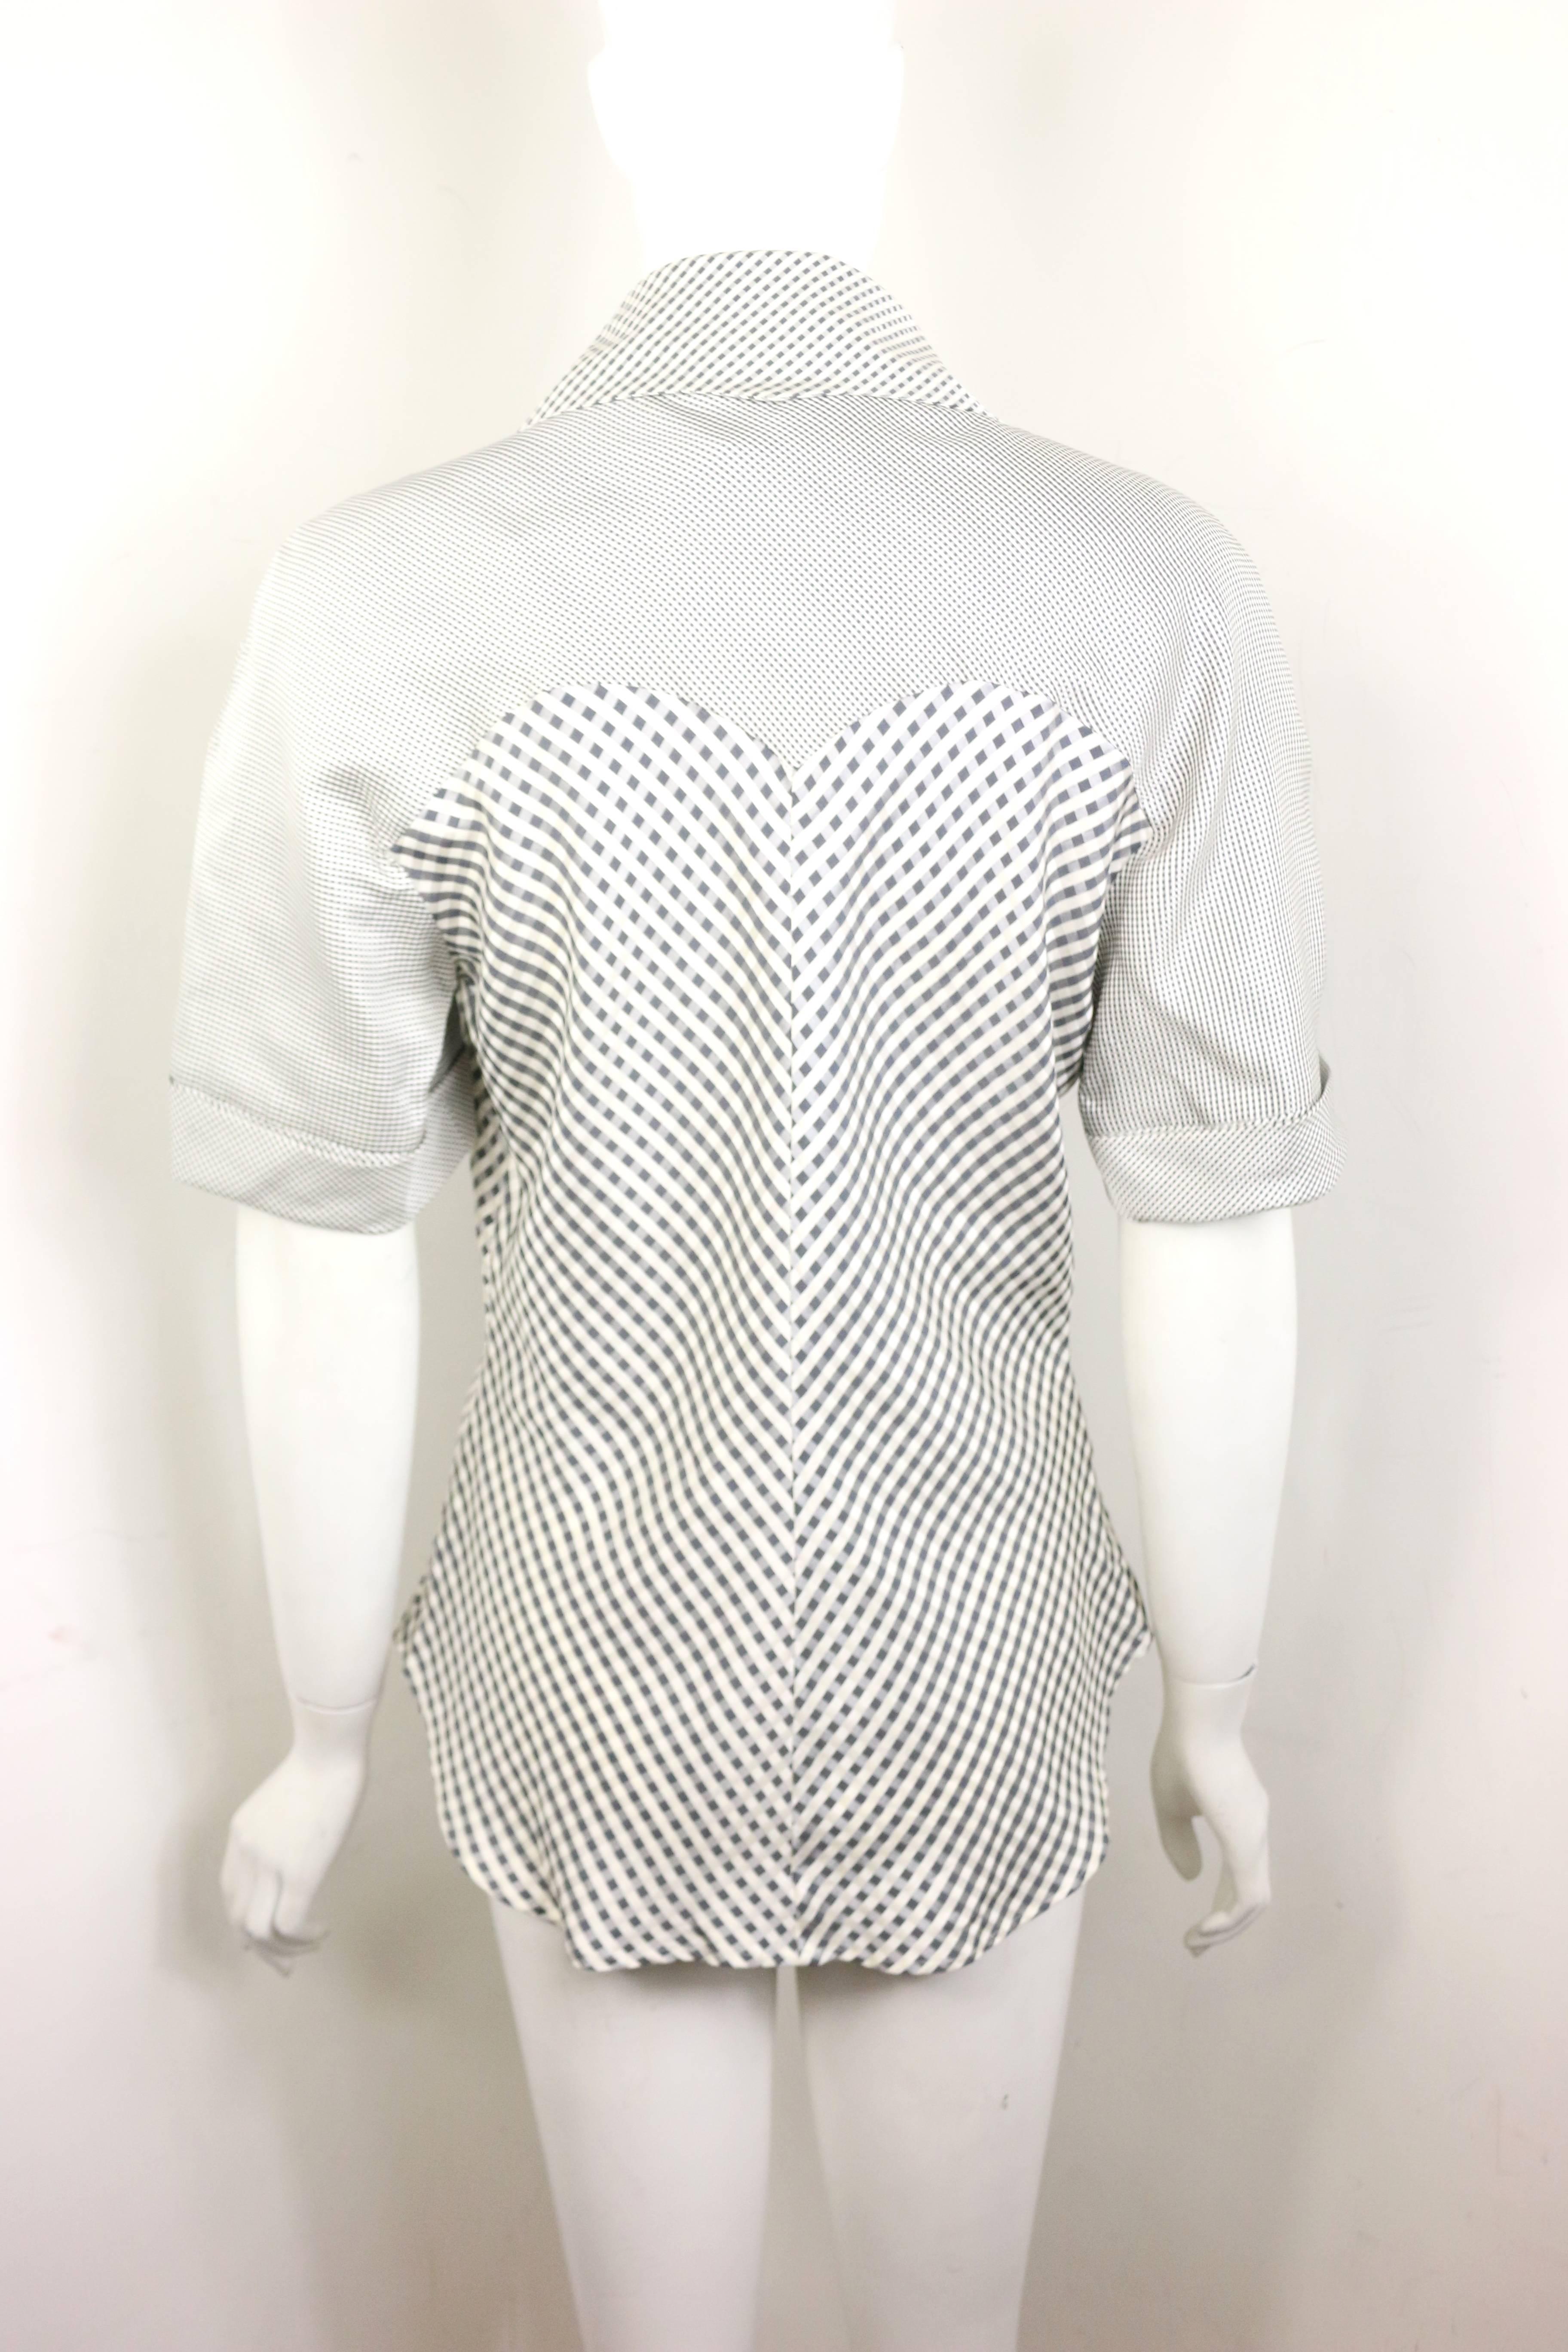 - Vintage 90s Givenchy Couture by Alexander McQueen black and white silk check pattern short sleeves blouse. 

- Featuring round shoulder with big pointy V-neck collar. 

- The hem is curvy at the front and it is slightly shorter than the back. 

-